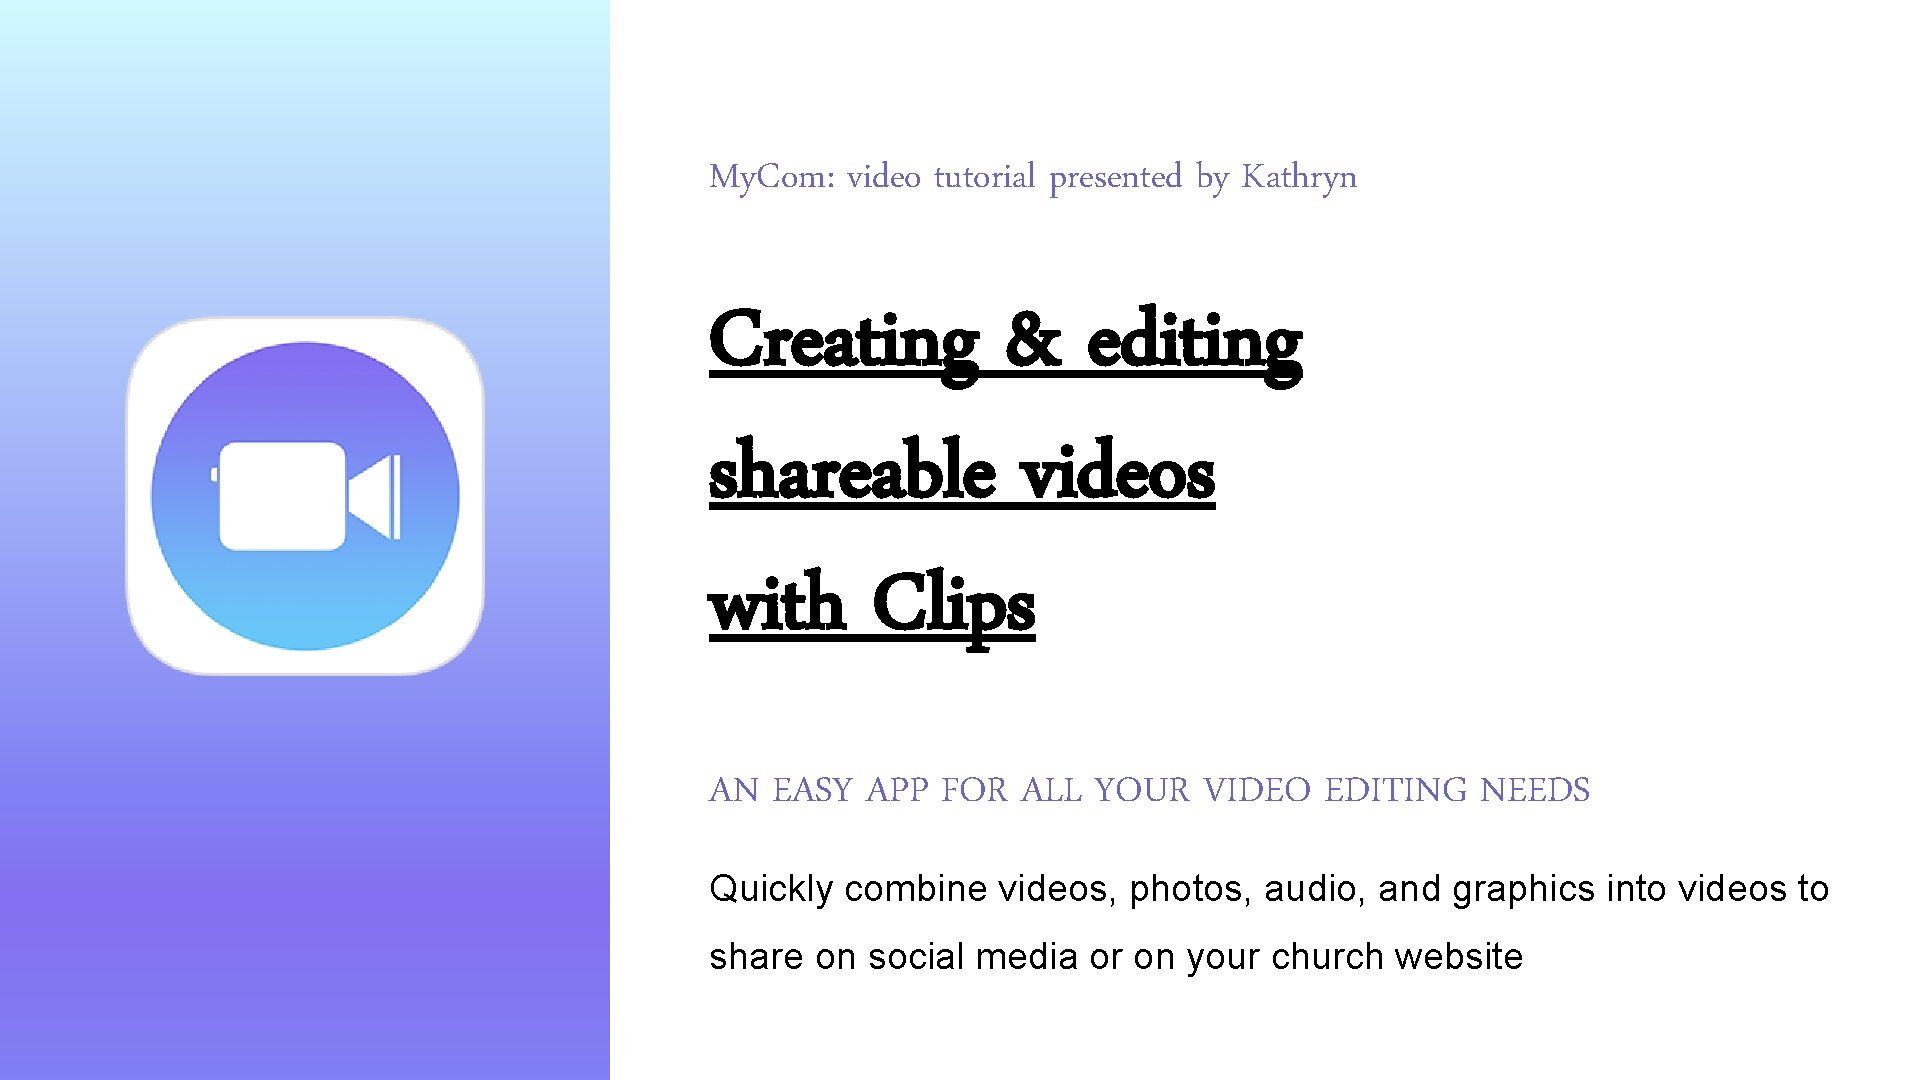 My. Com: video tutorial presented by Kathryn Creating & editing shareable videos with Clips